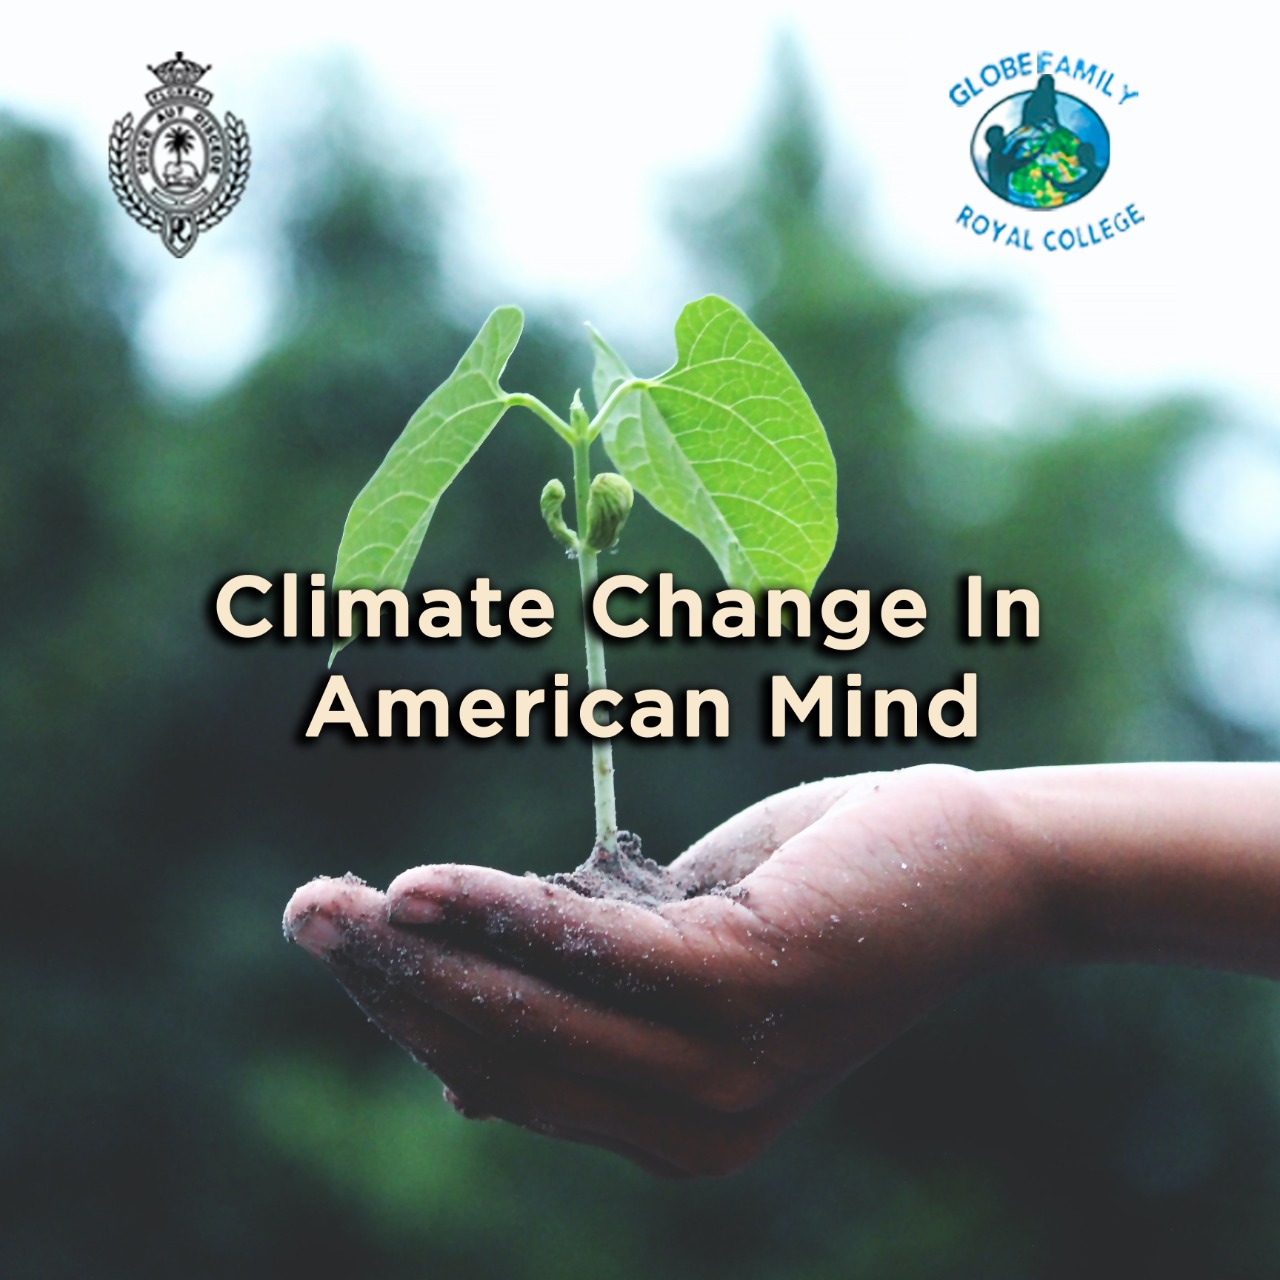 Climate change in the American mind - The Royal College